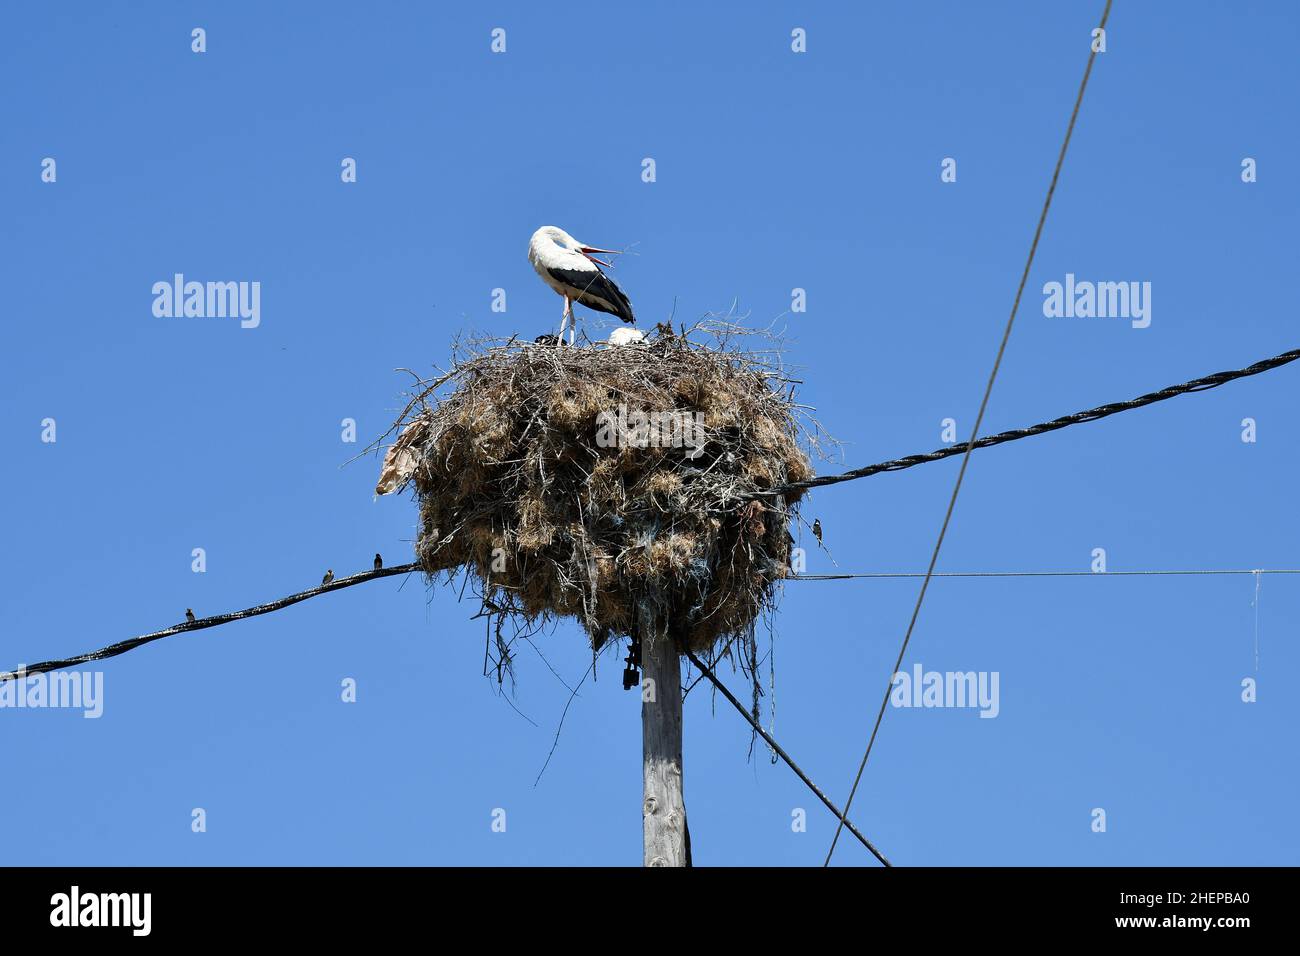 Greece, Stork nest with young birds on wooden power pole Stock Photo